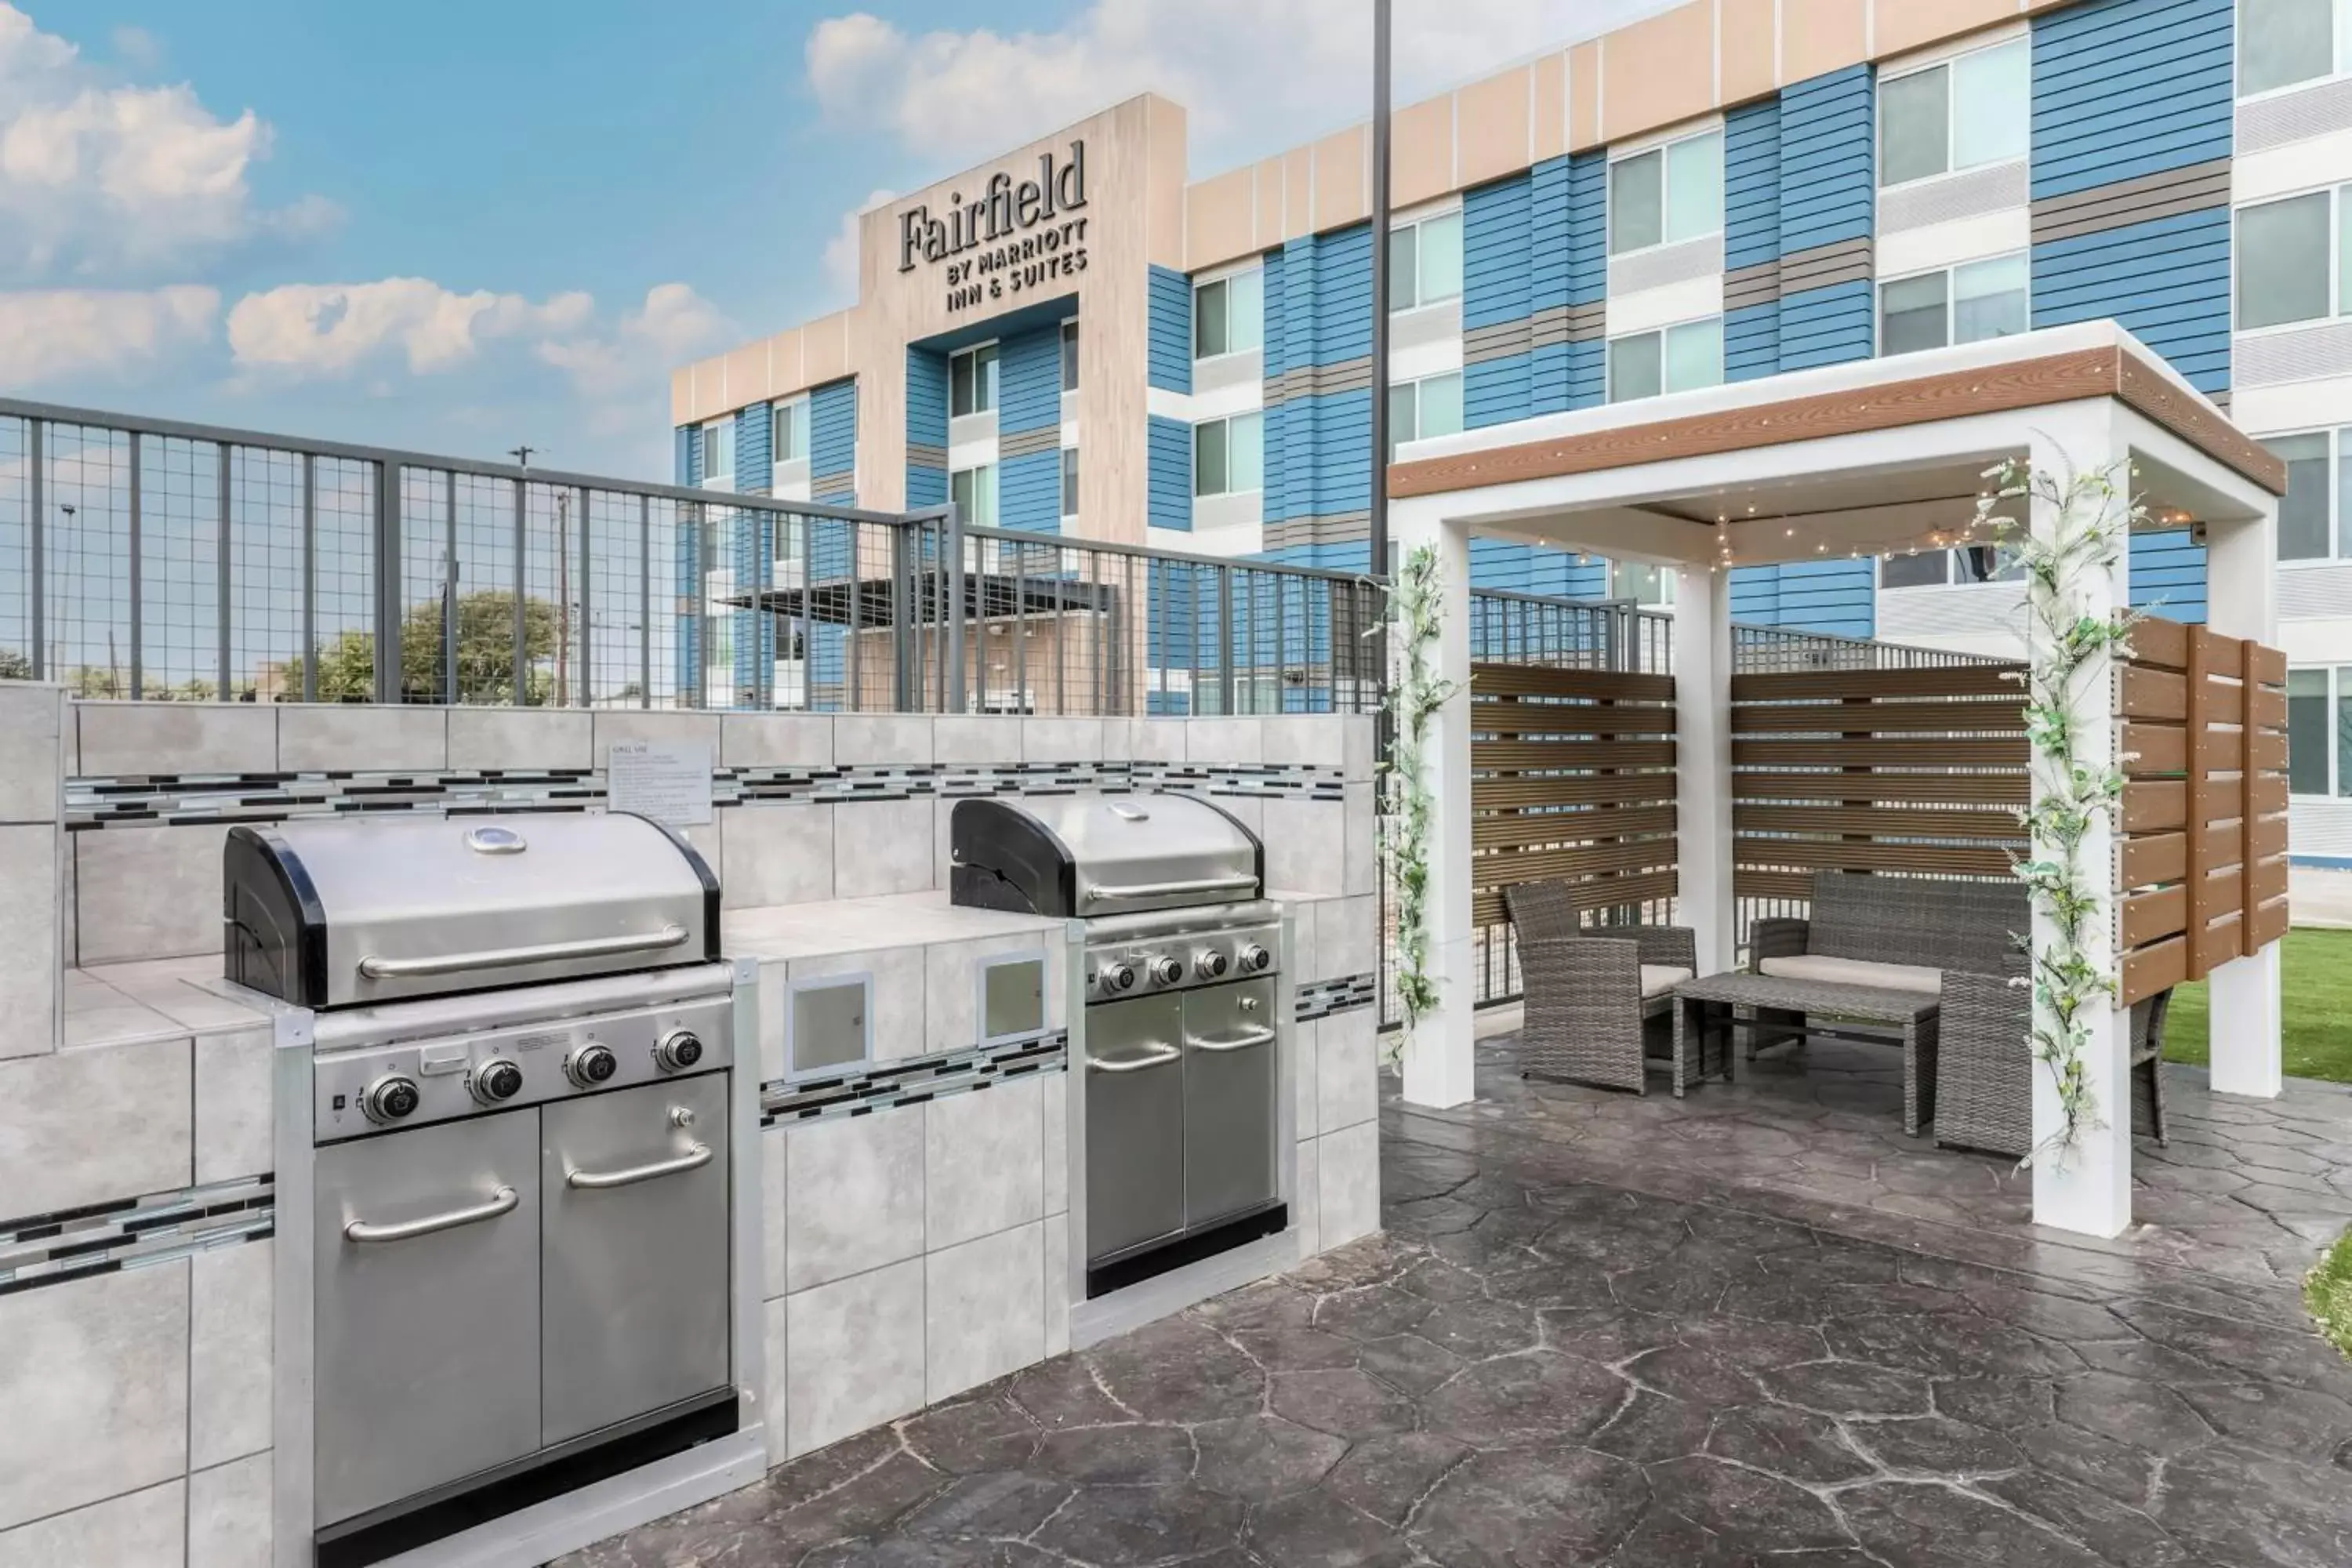 Property building, BBQ Facilities in Four Points by Sheraton Amarillo Central